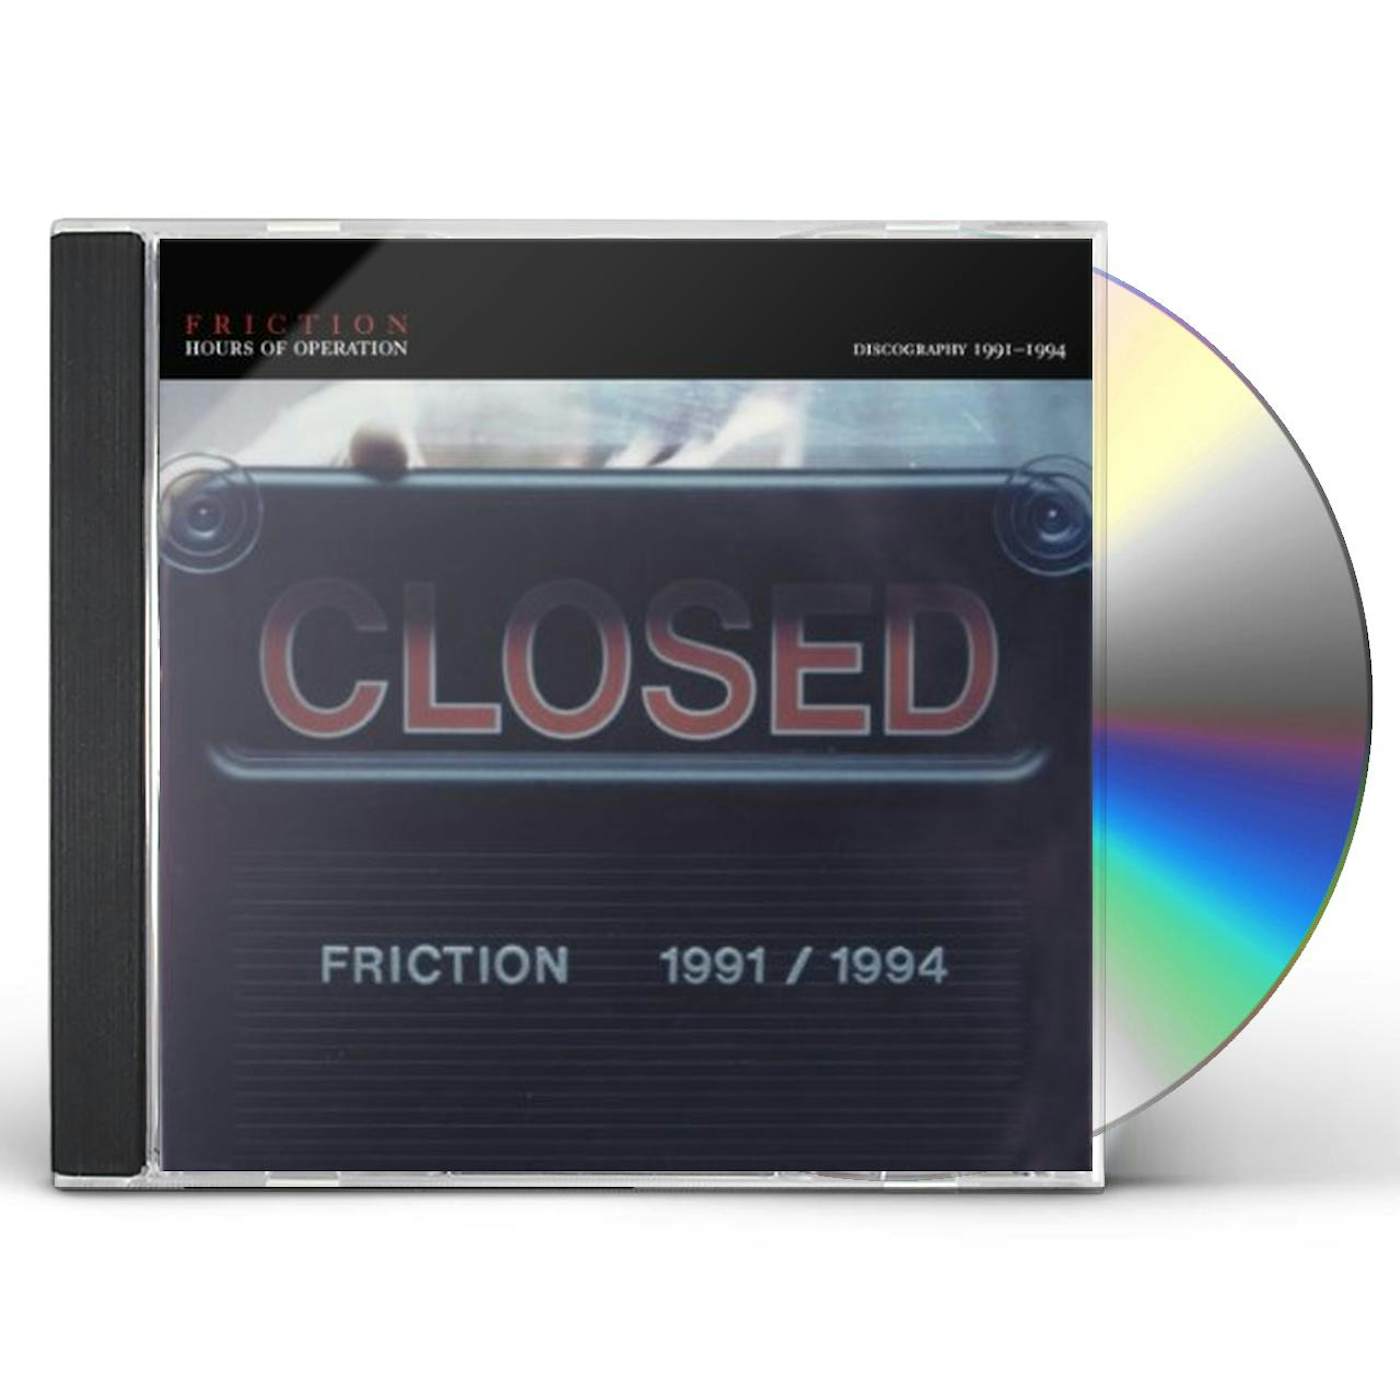 Friction DISCOGRAPHY 1991-1994 CD